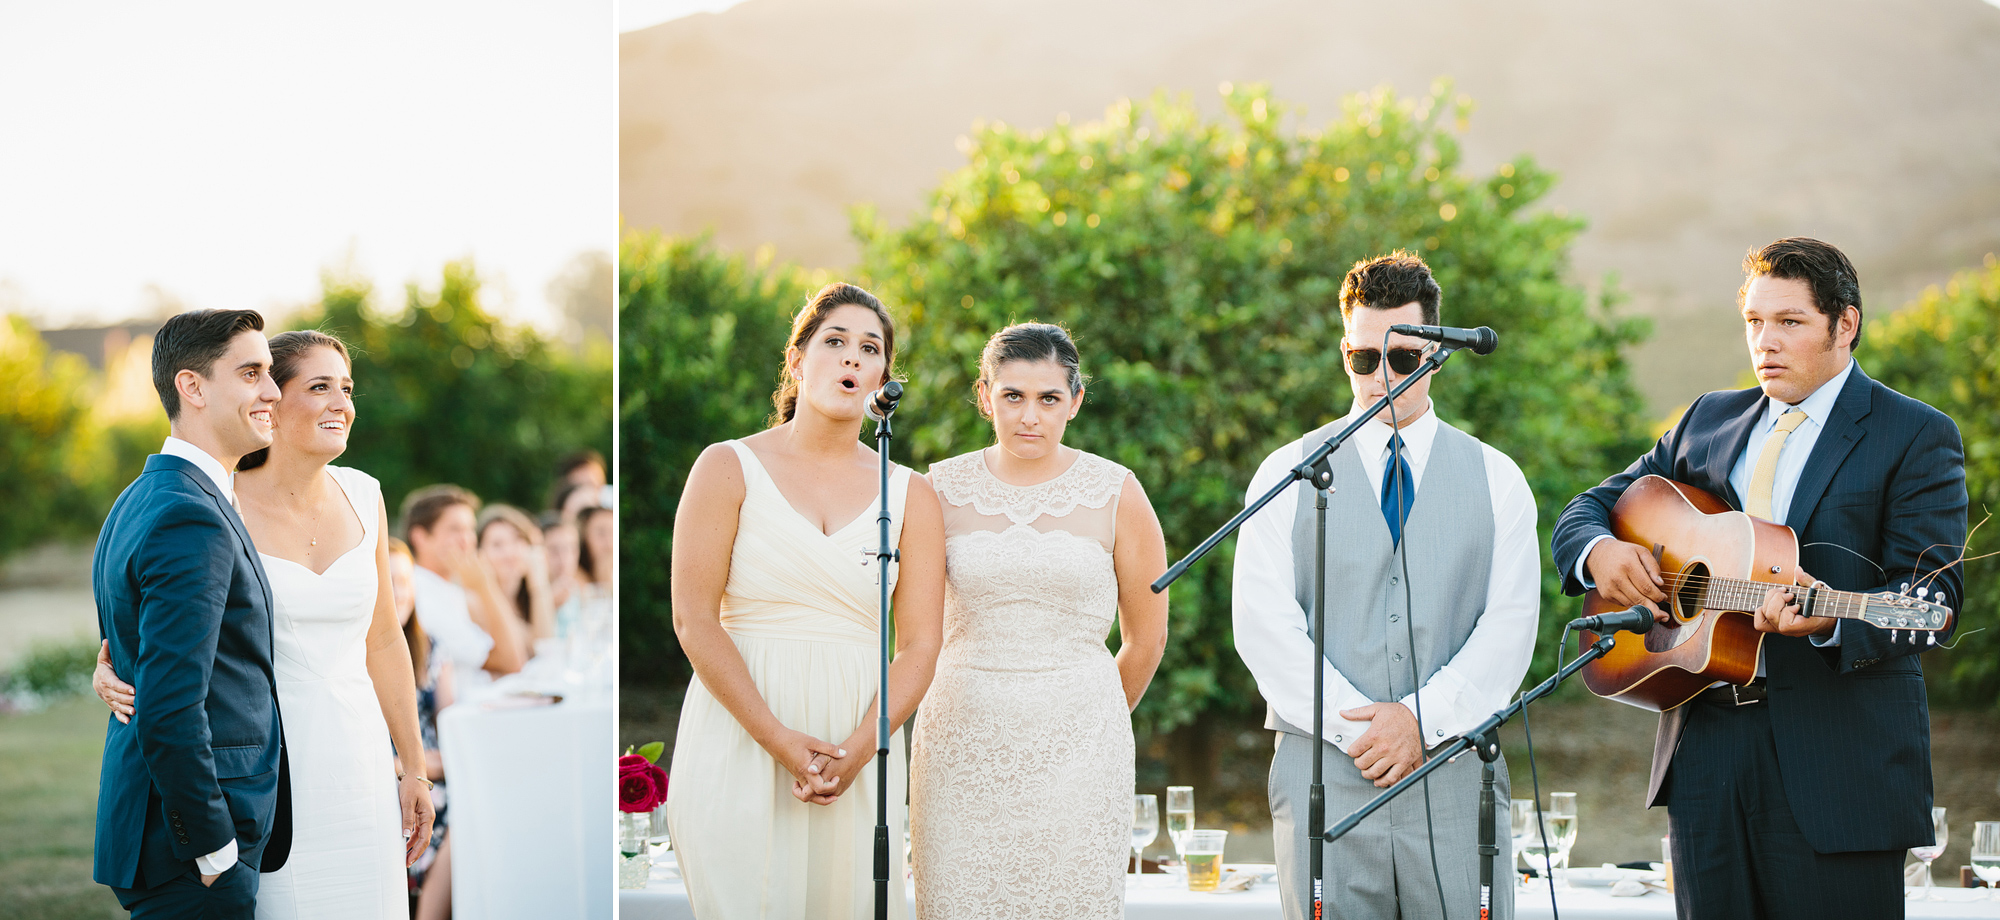 The bride's siblings sang a special song for the couple. 